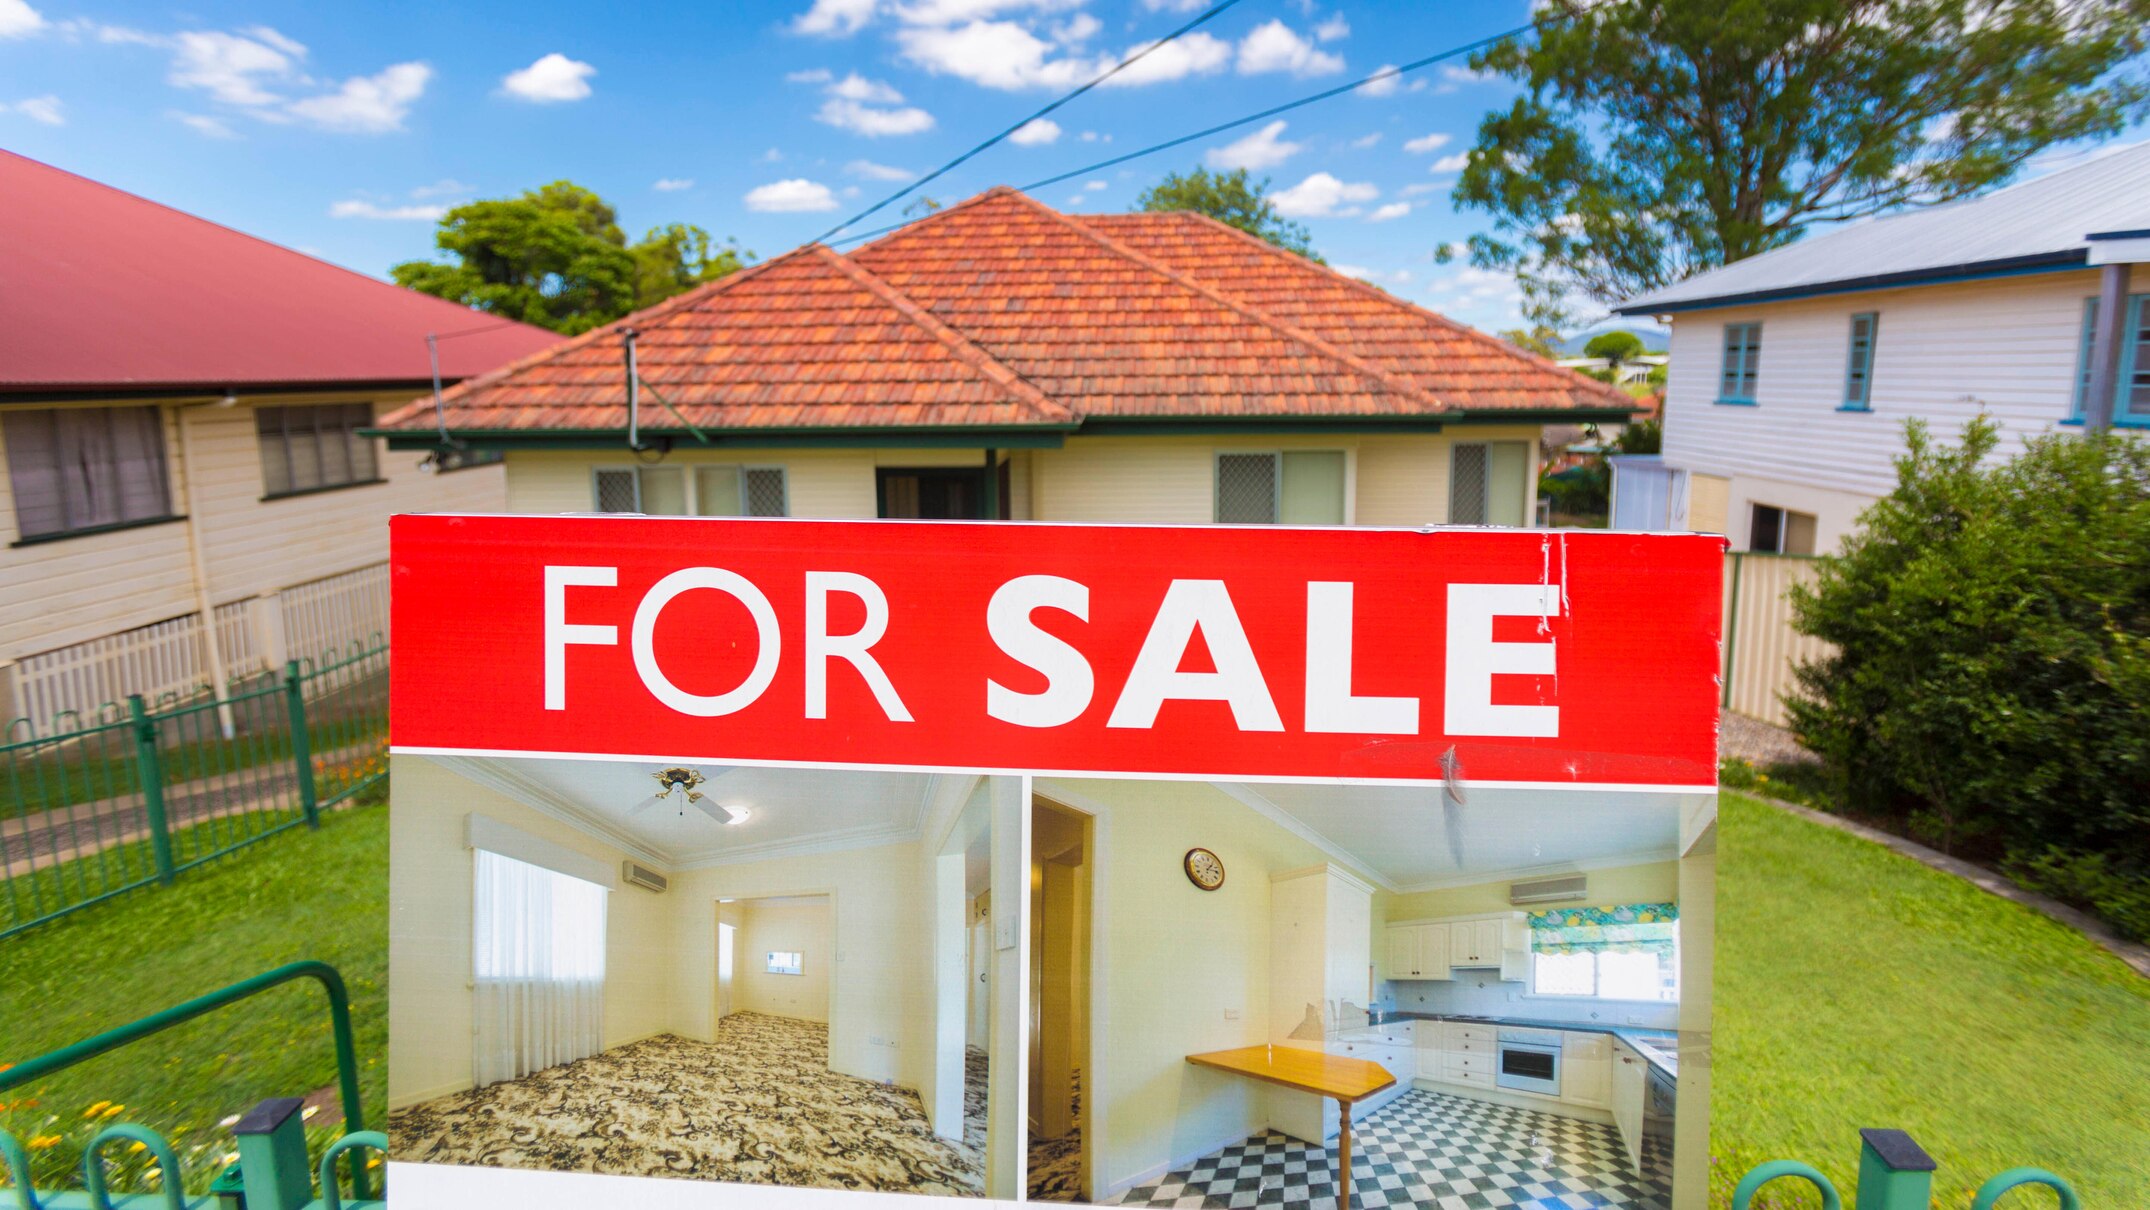 rushed buyers at risk of purchasing homes with termites and structural issues, inspector warns